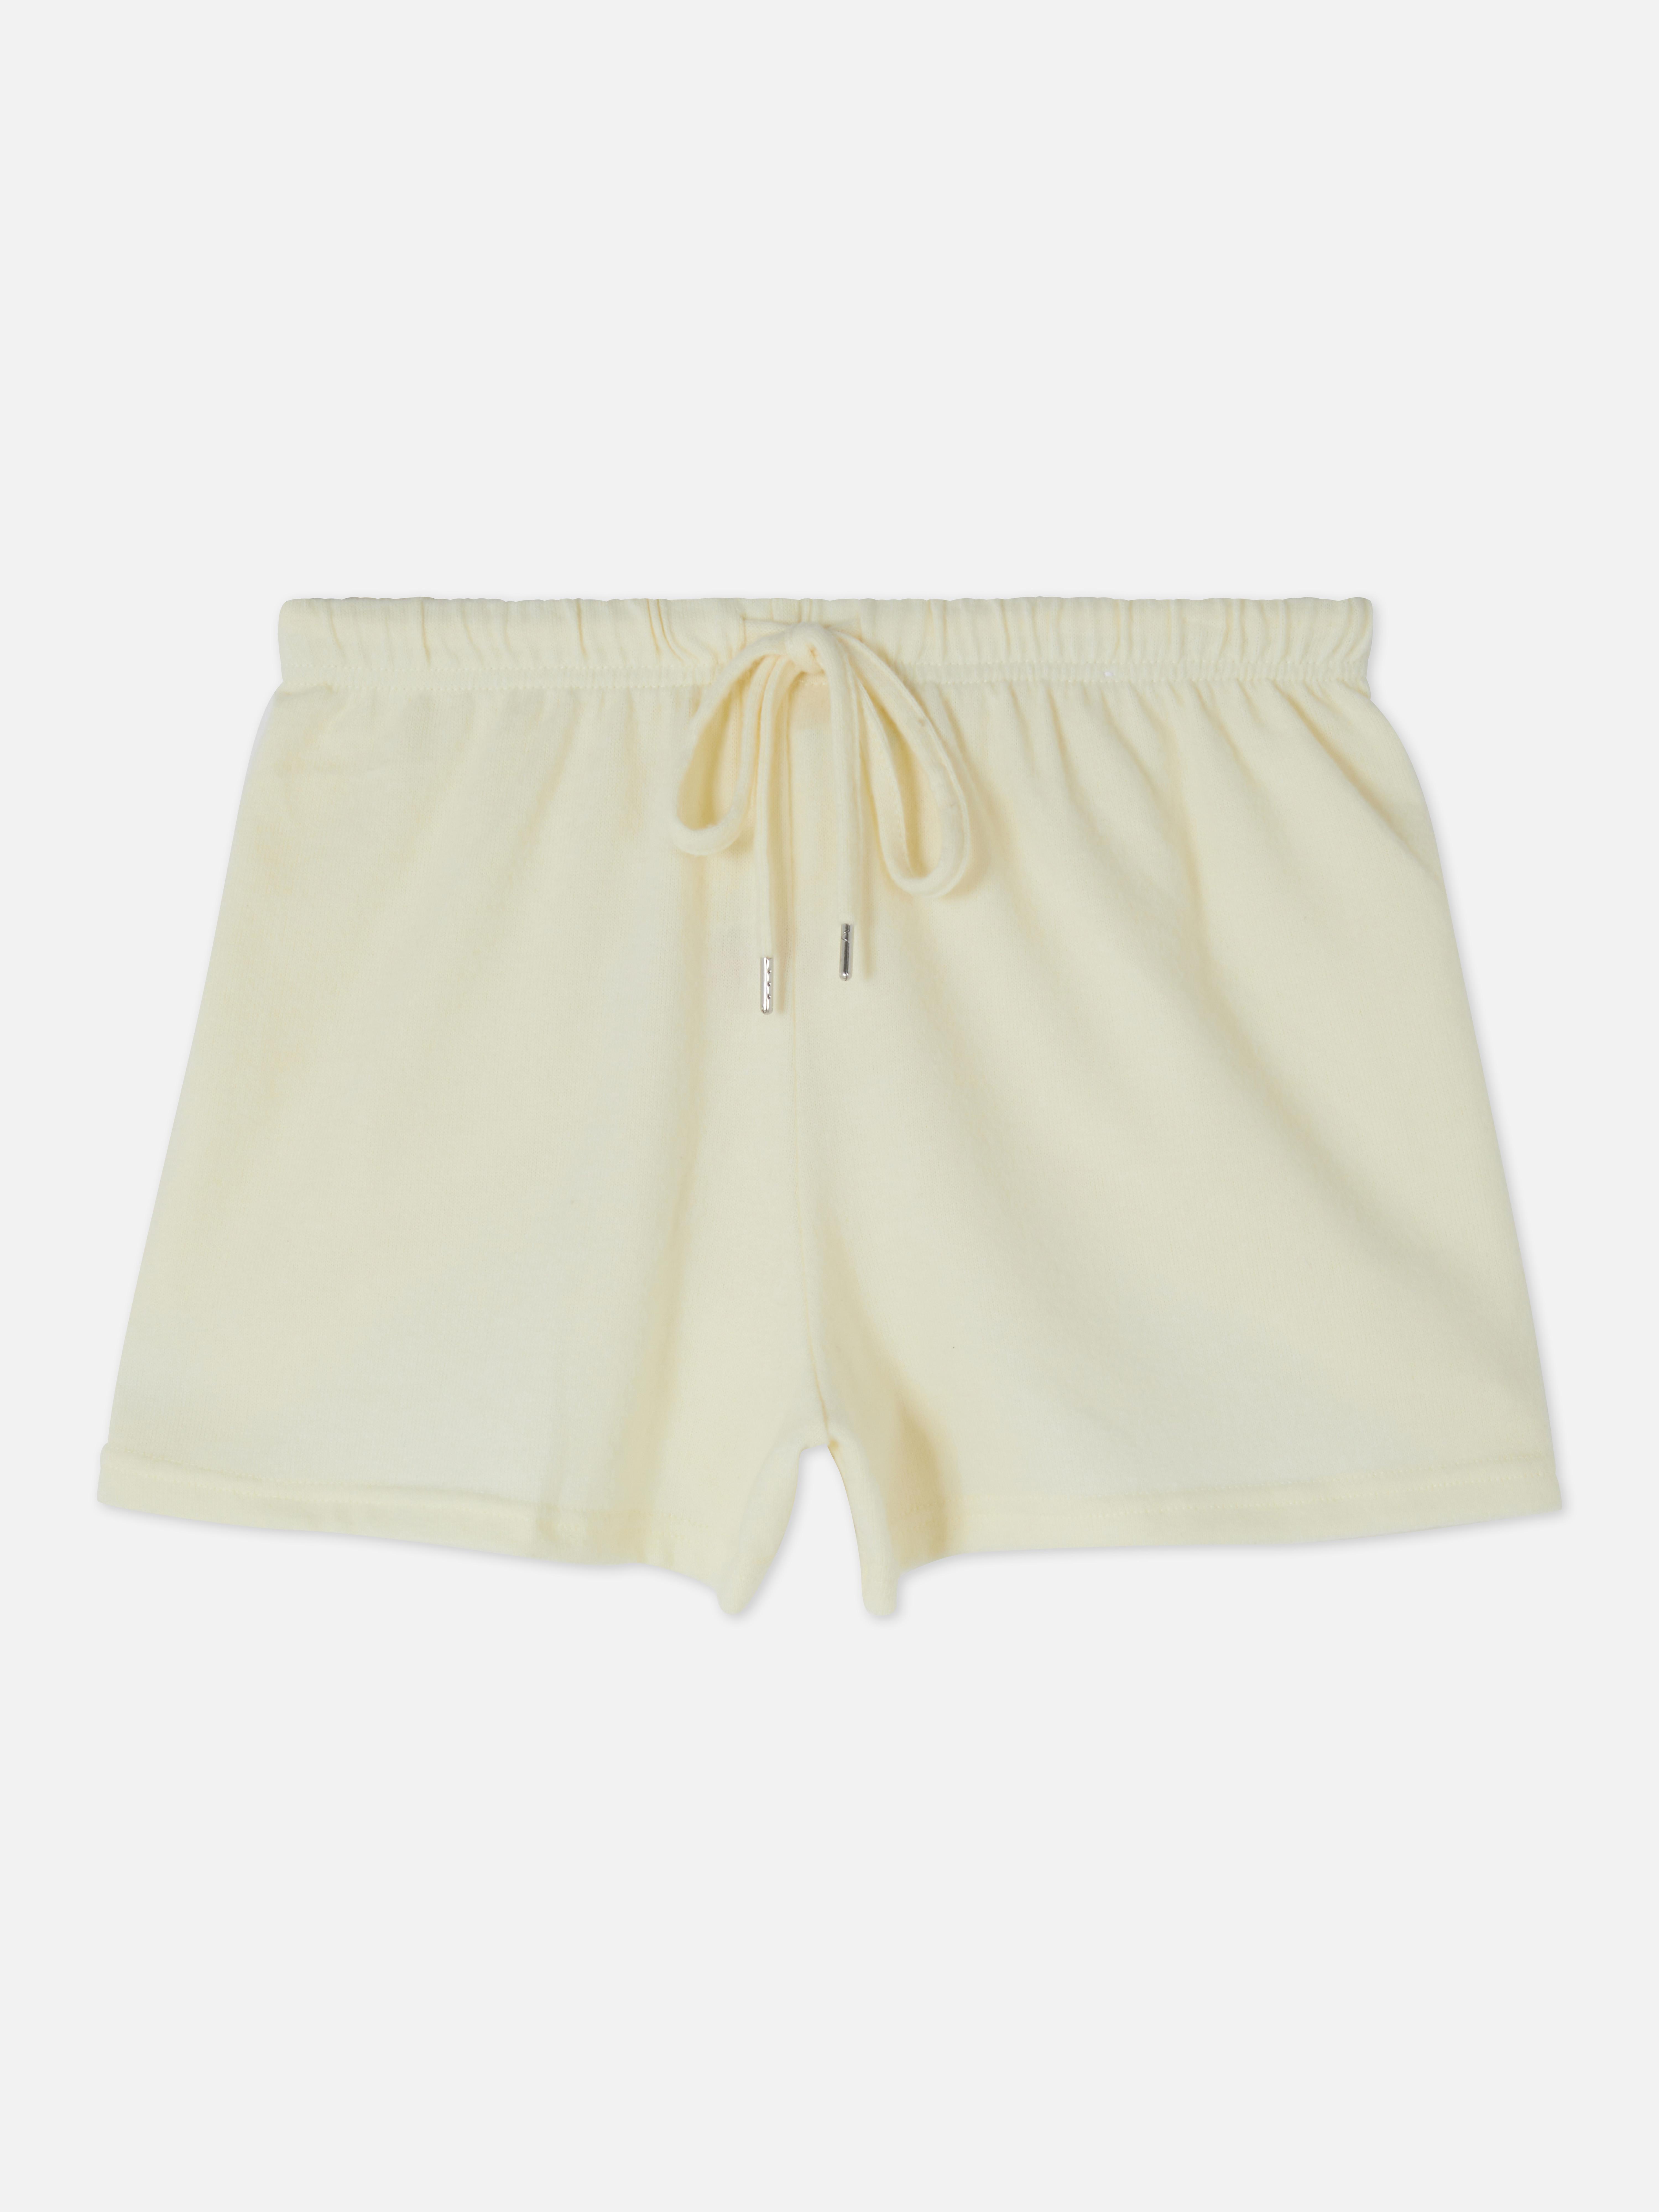 Supersoft Bed Shorts